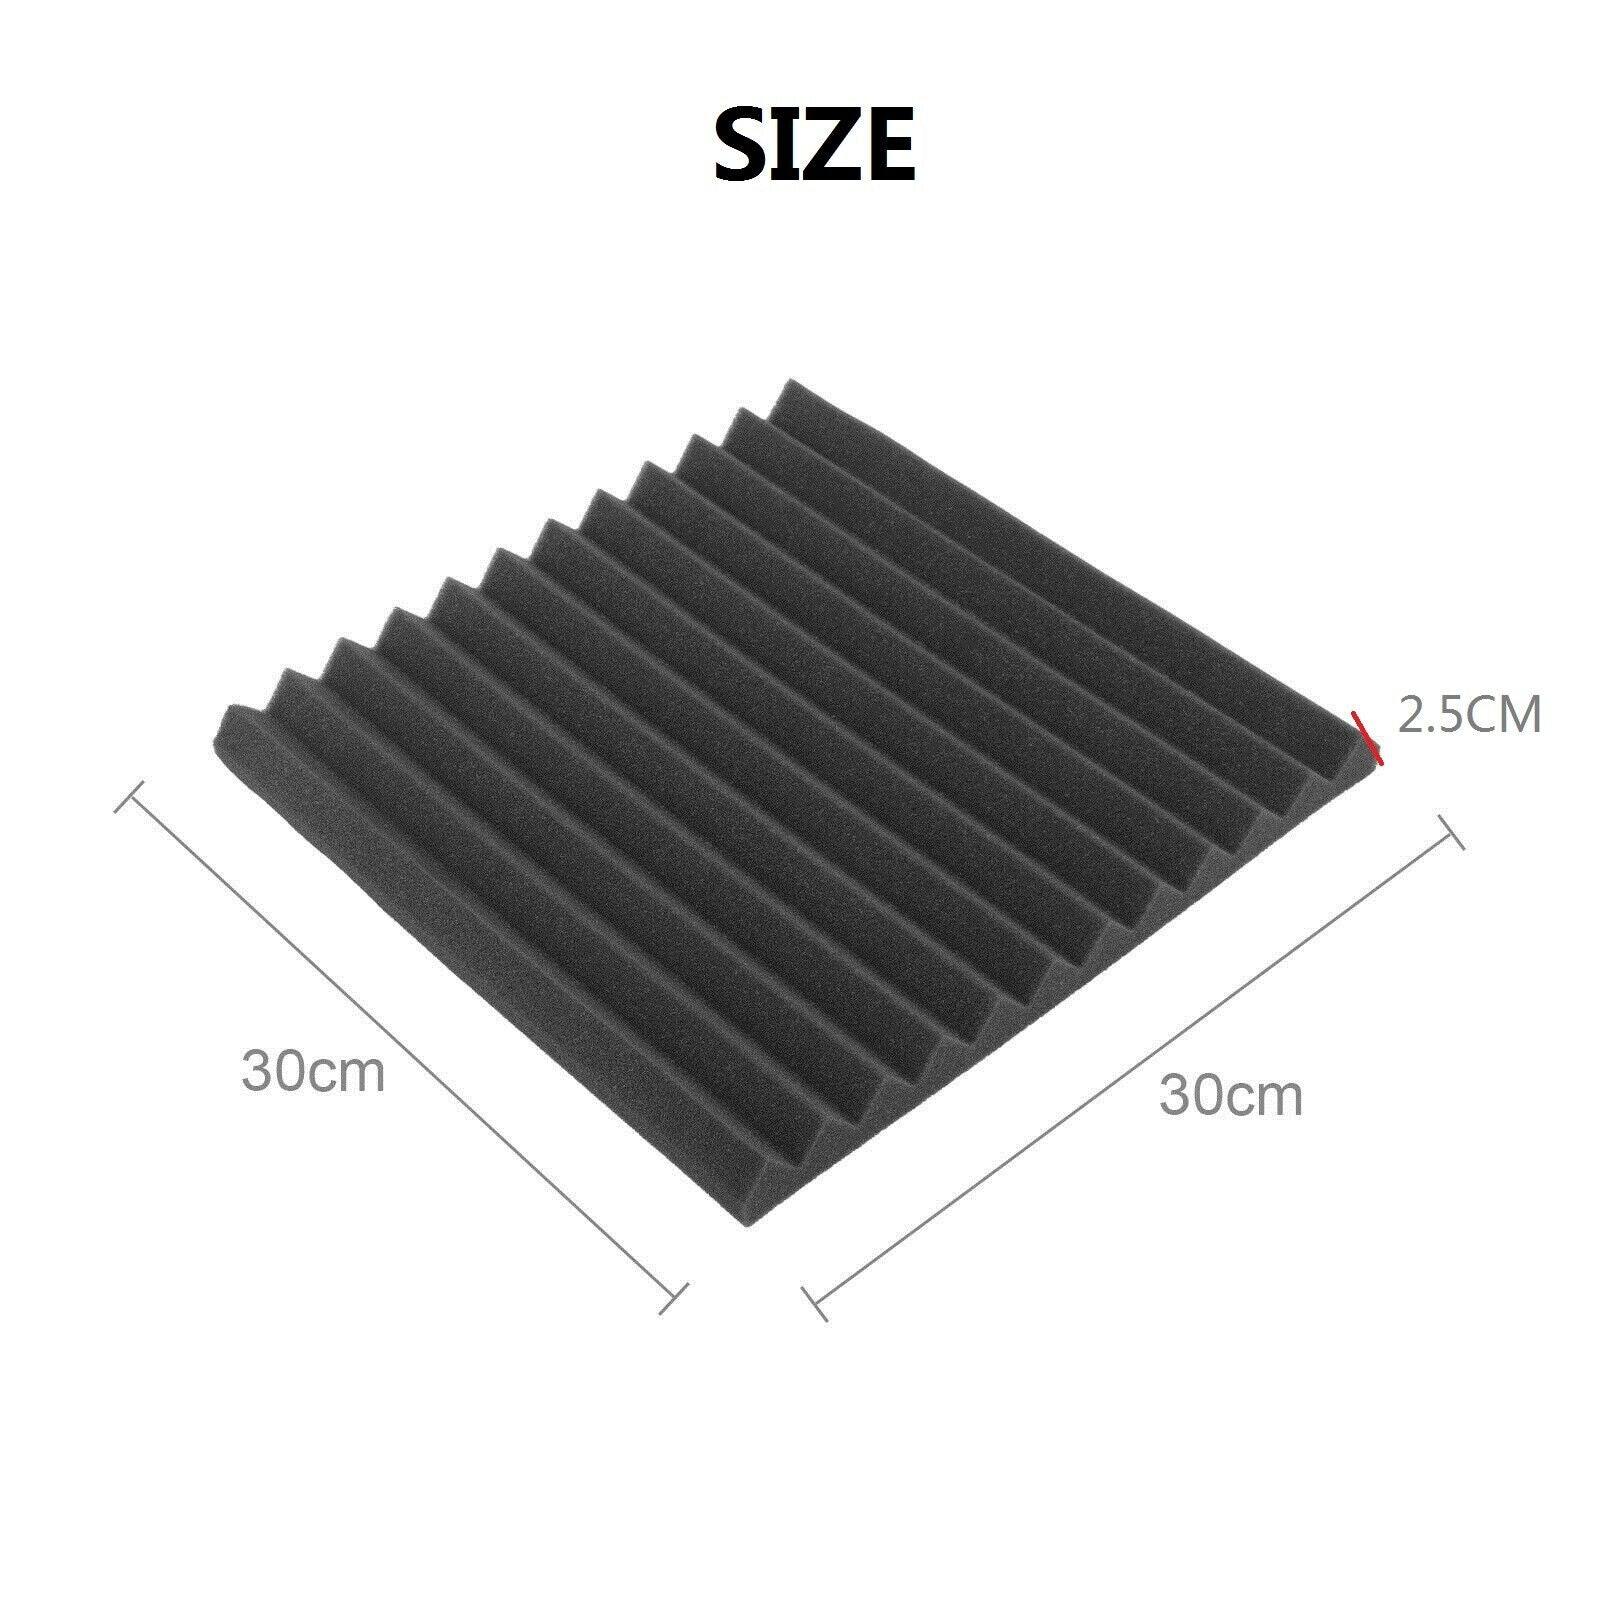 48 Pack | Studio Acoustic Foam Sound Absorbtion Proofing Panels Tiles Wedge | 30*30*2.5cm - Office Catch